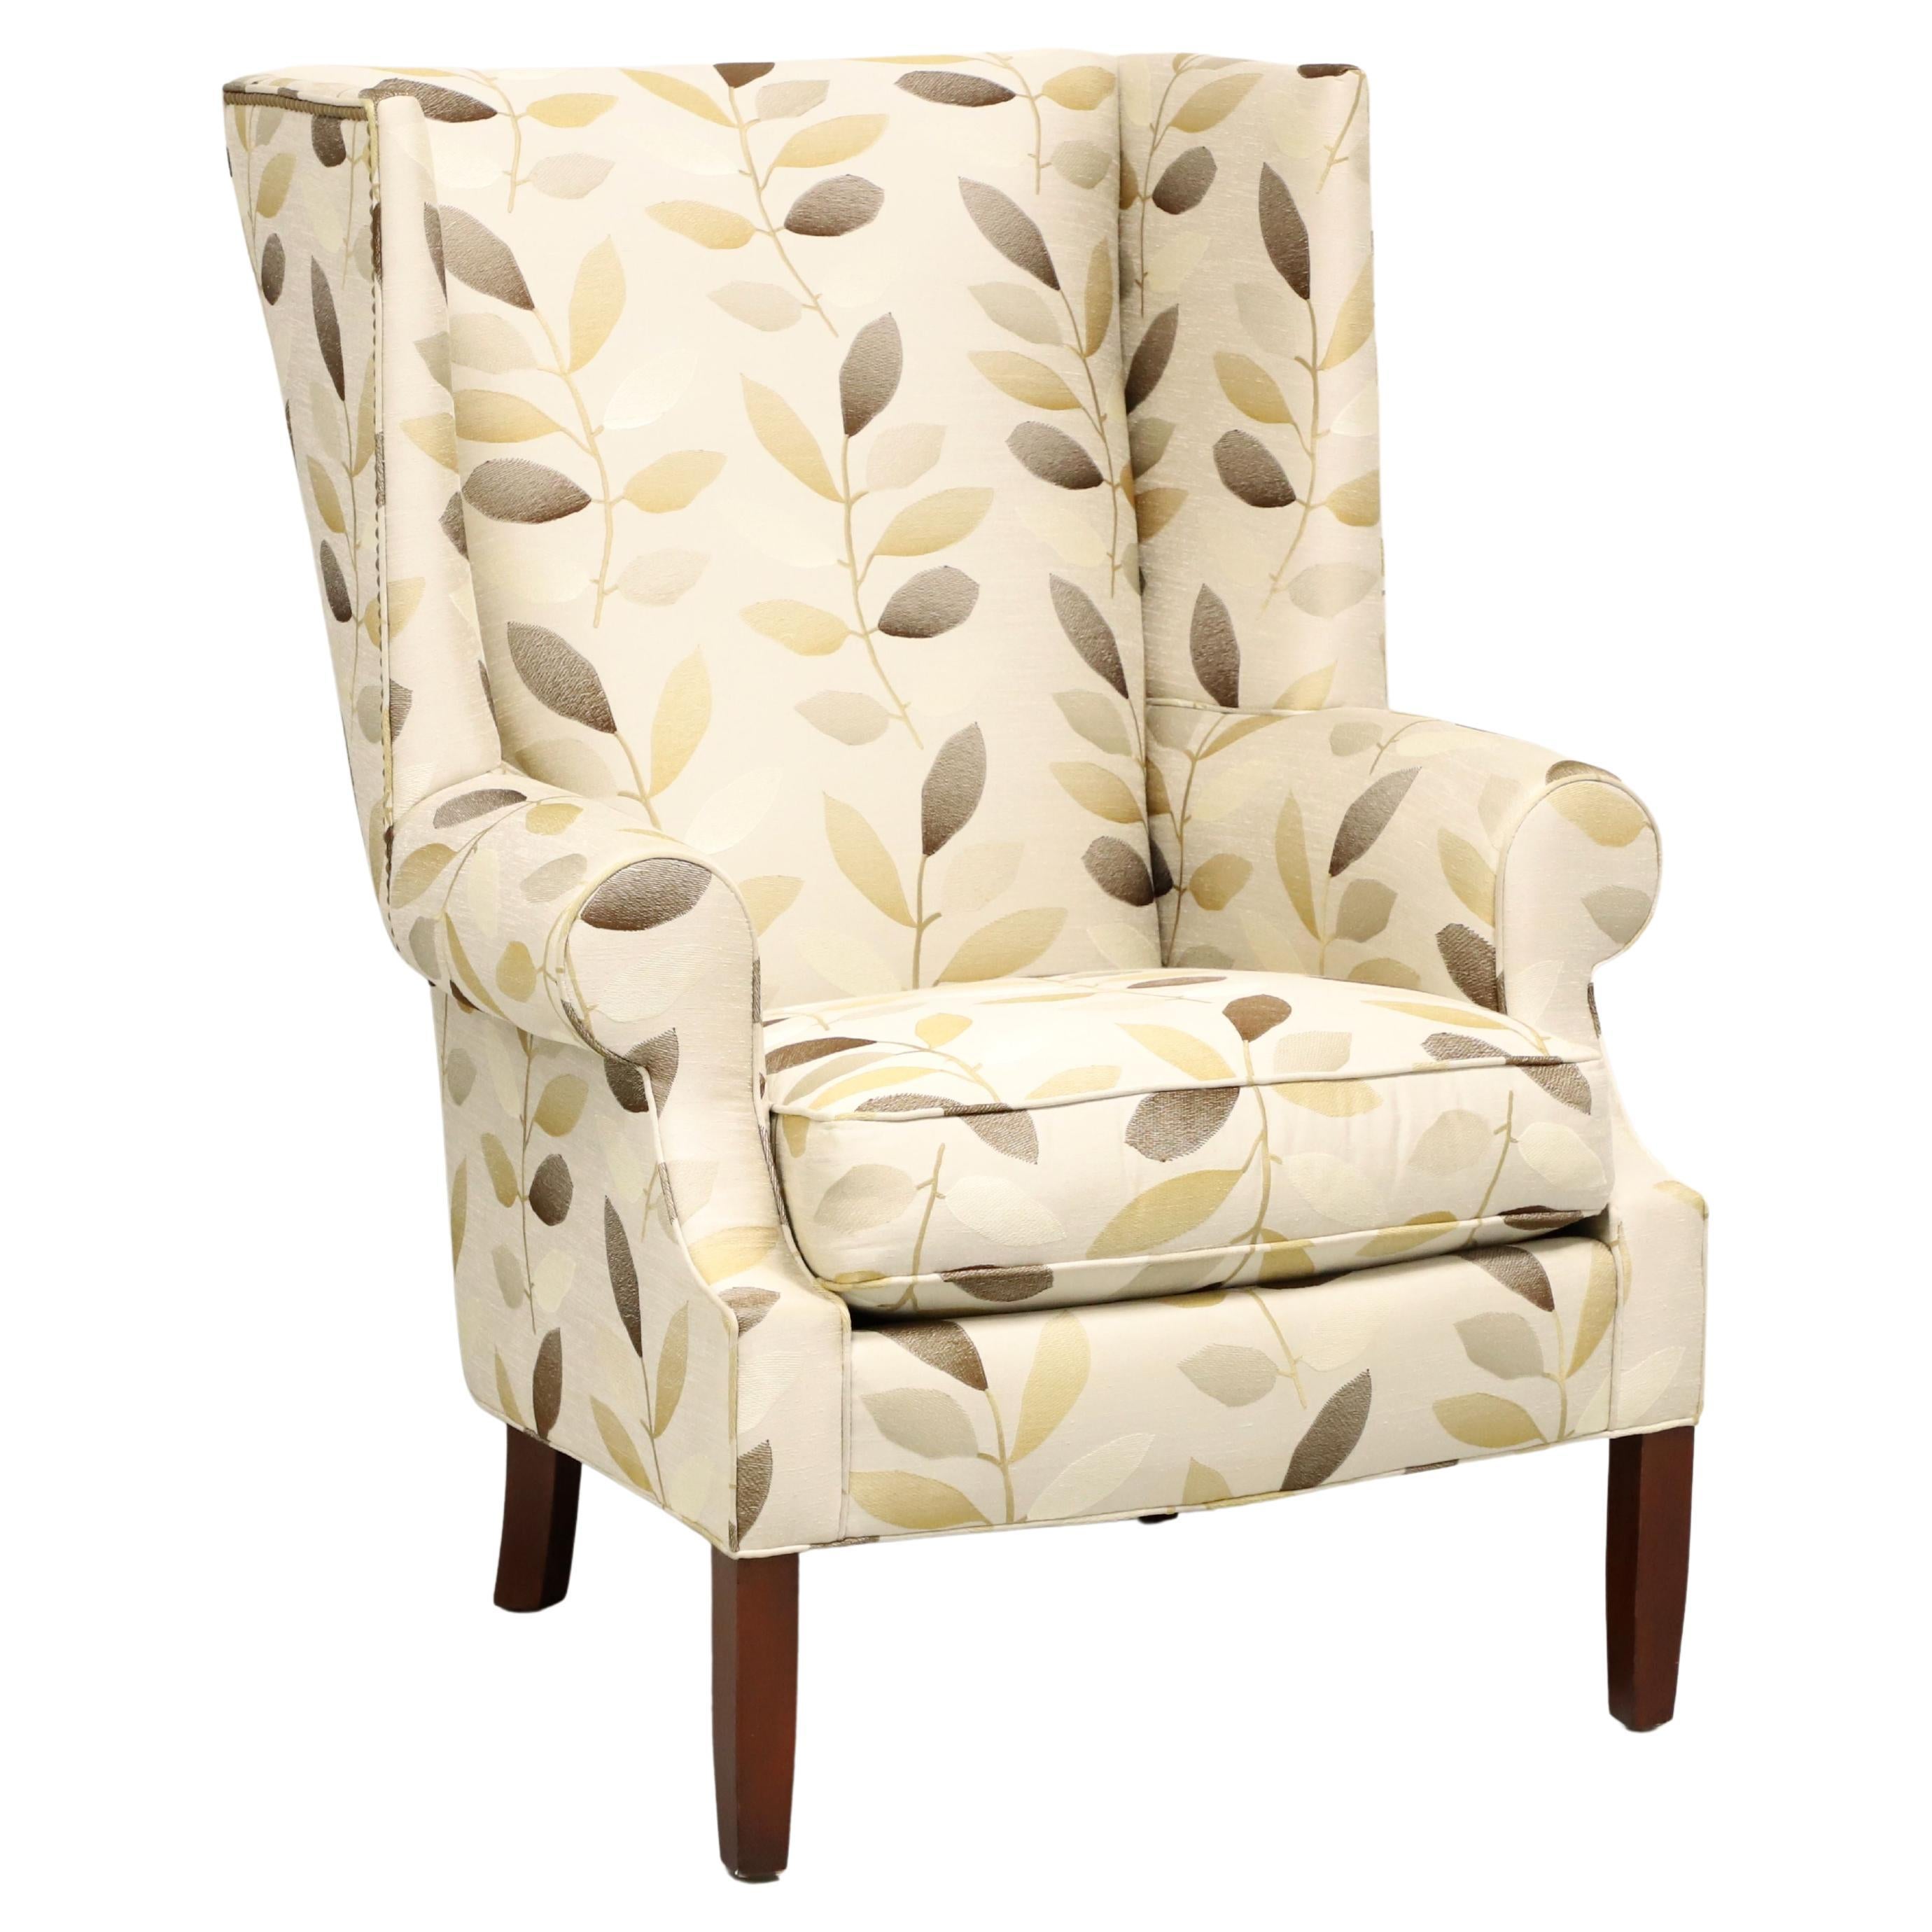 STICKLEY Transitional Style Park City Wing Chair - A For Sale